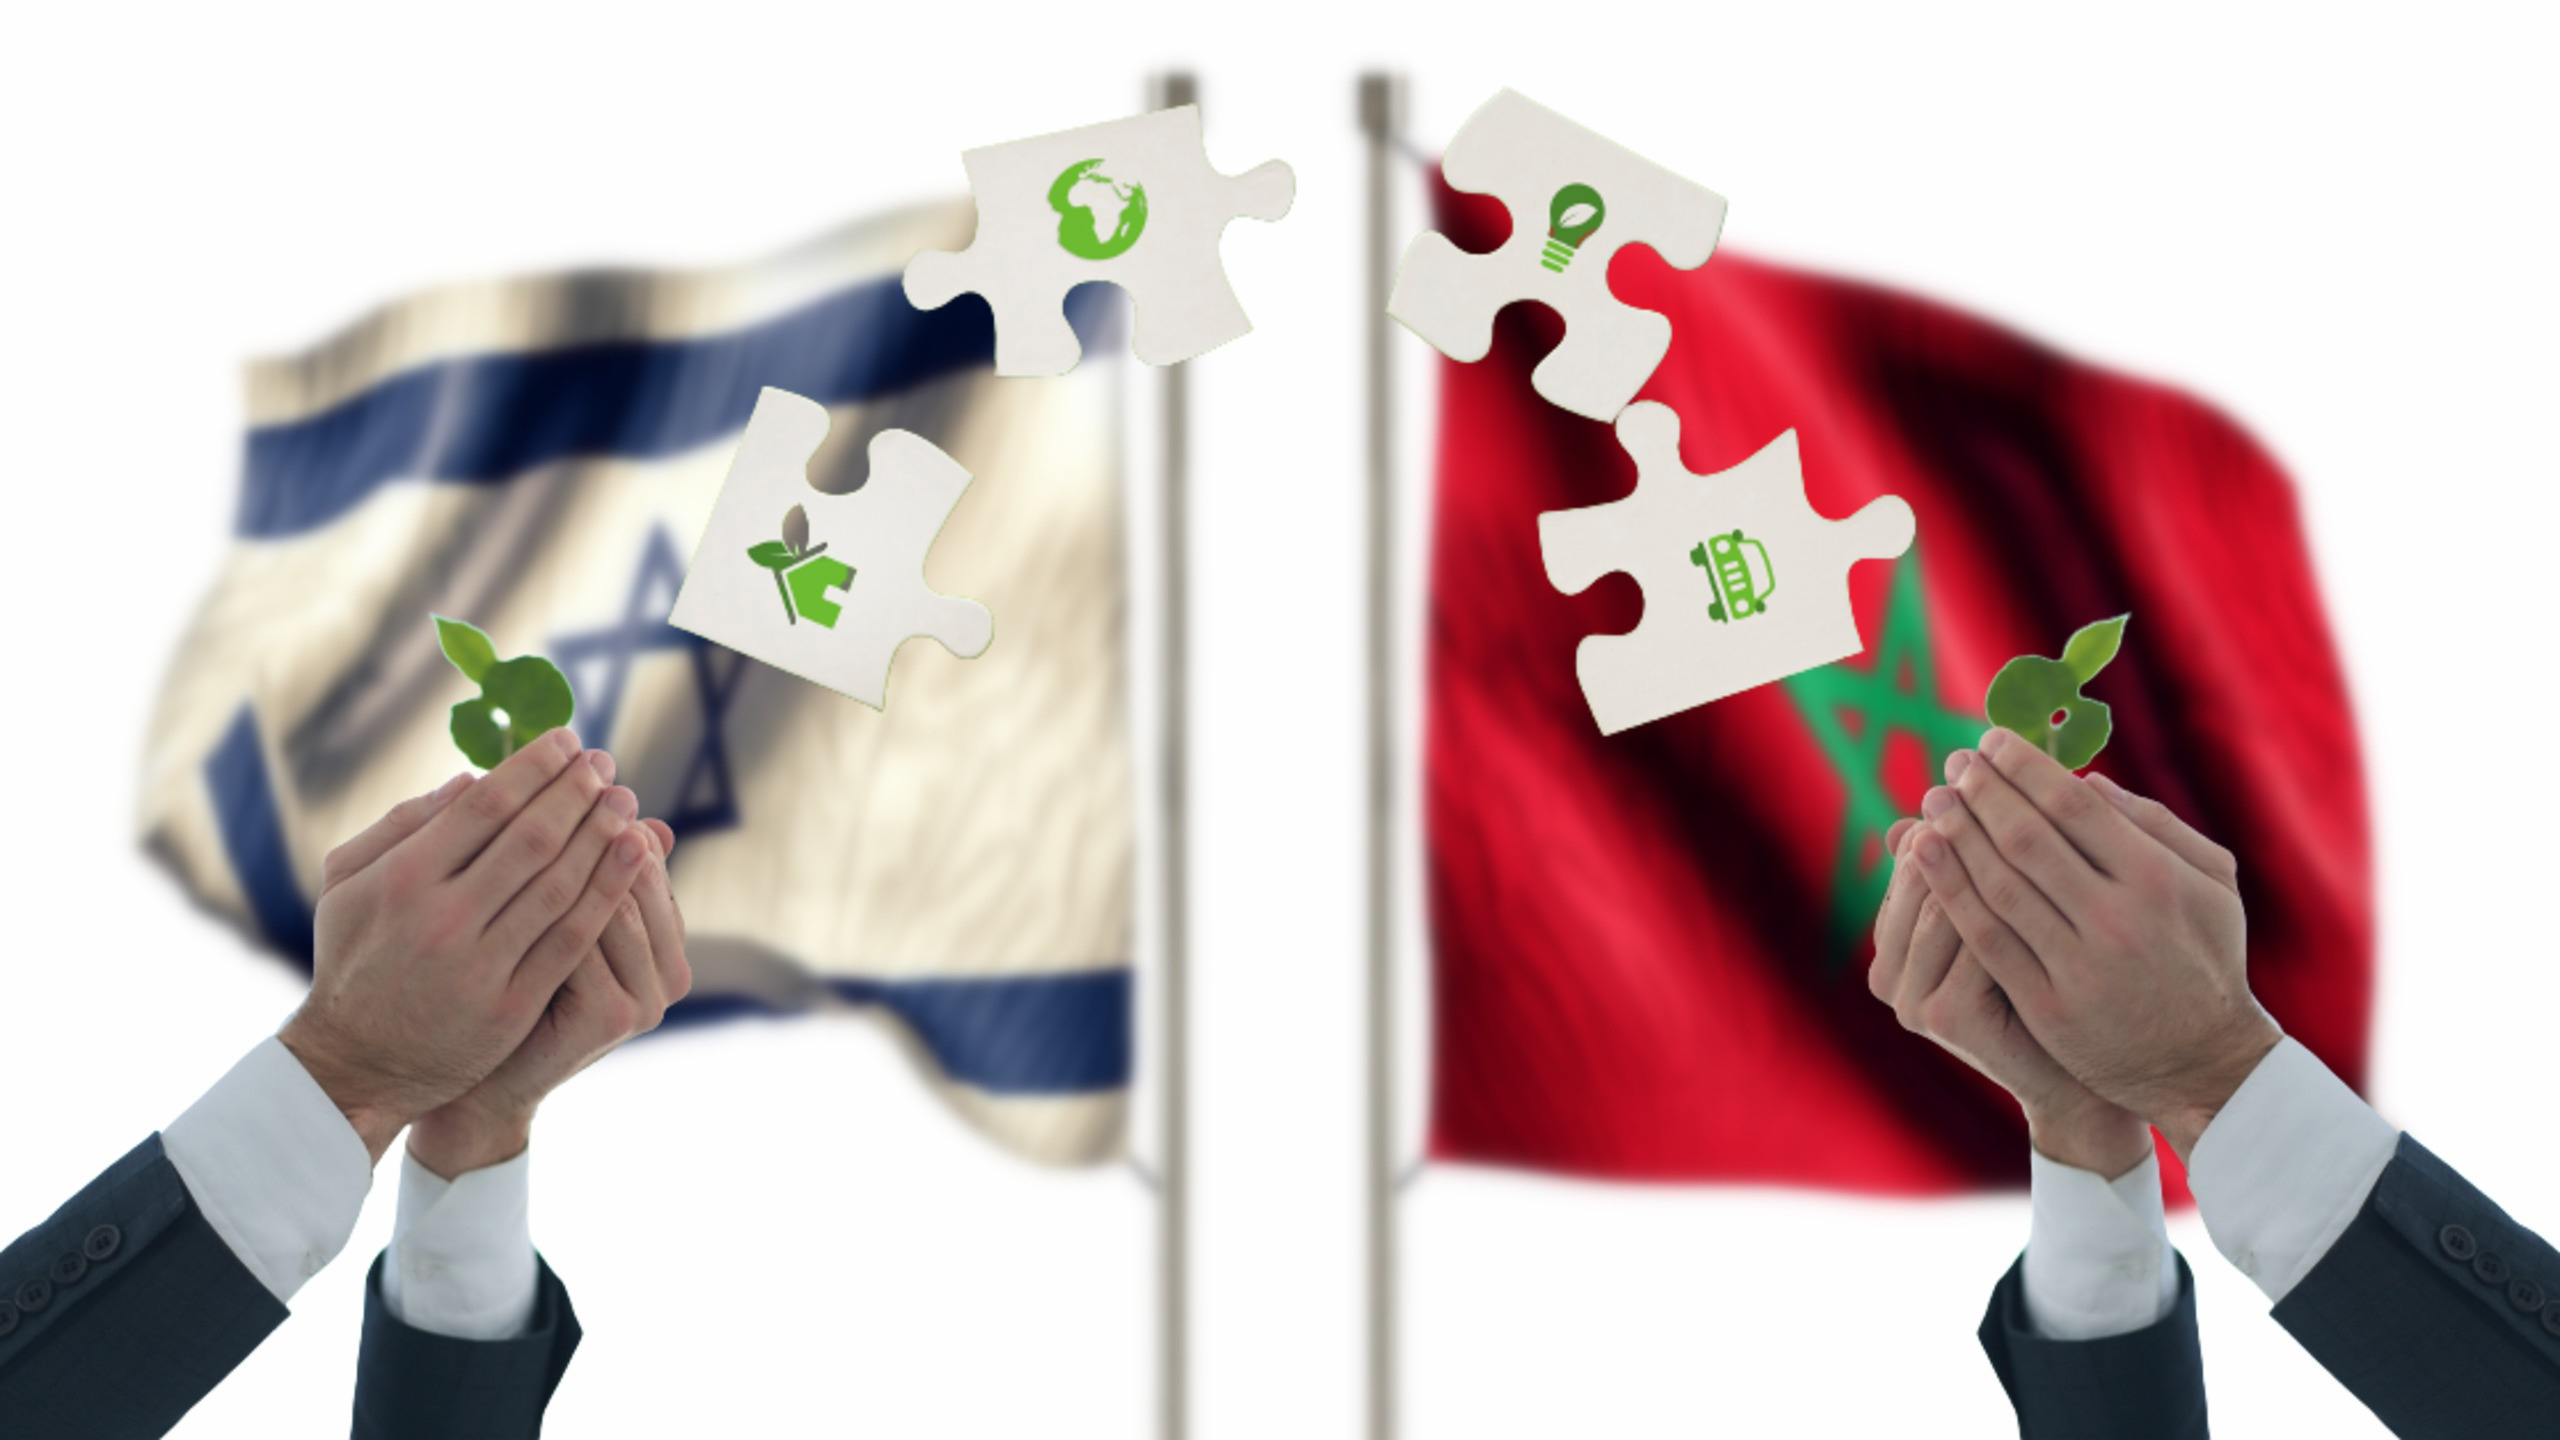 Israel, Morocco To Partner on Climate, Environmental Initiatives